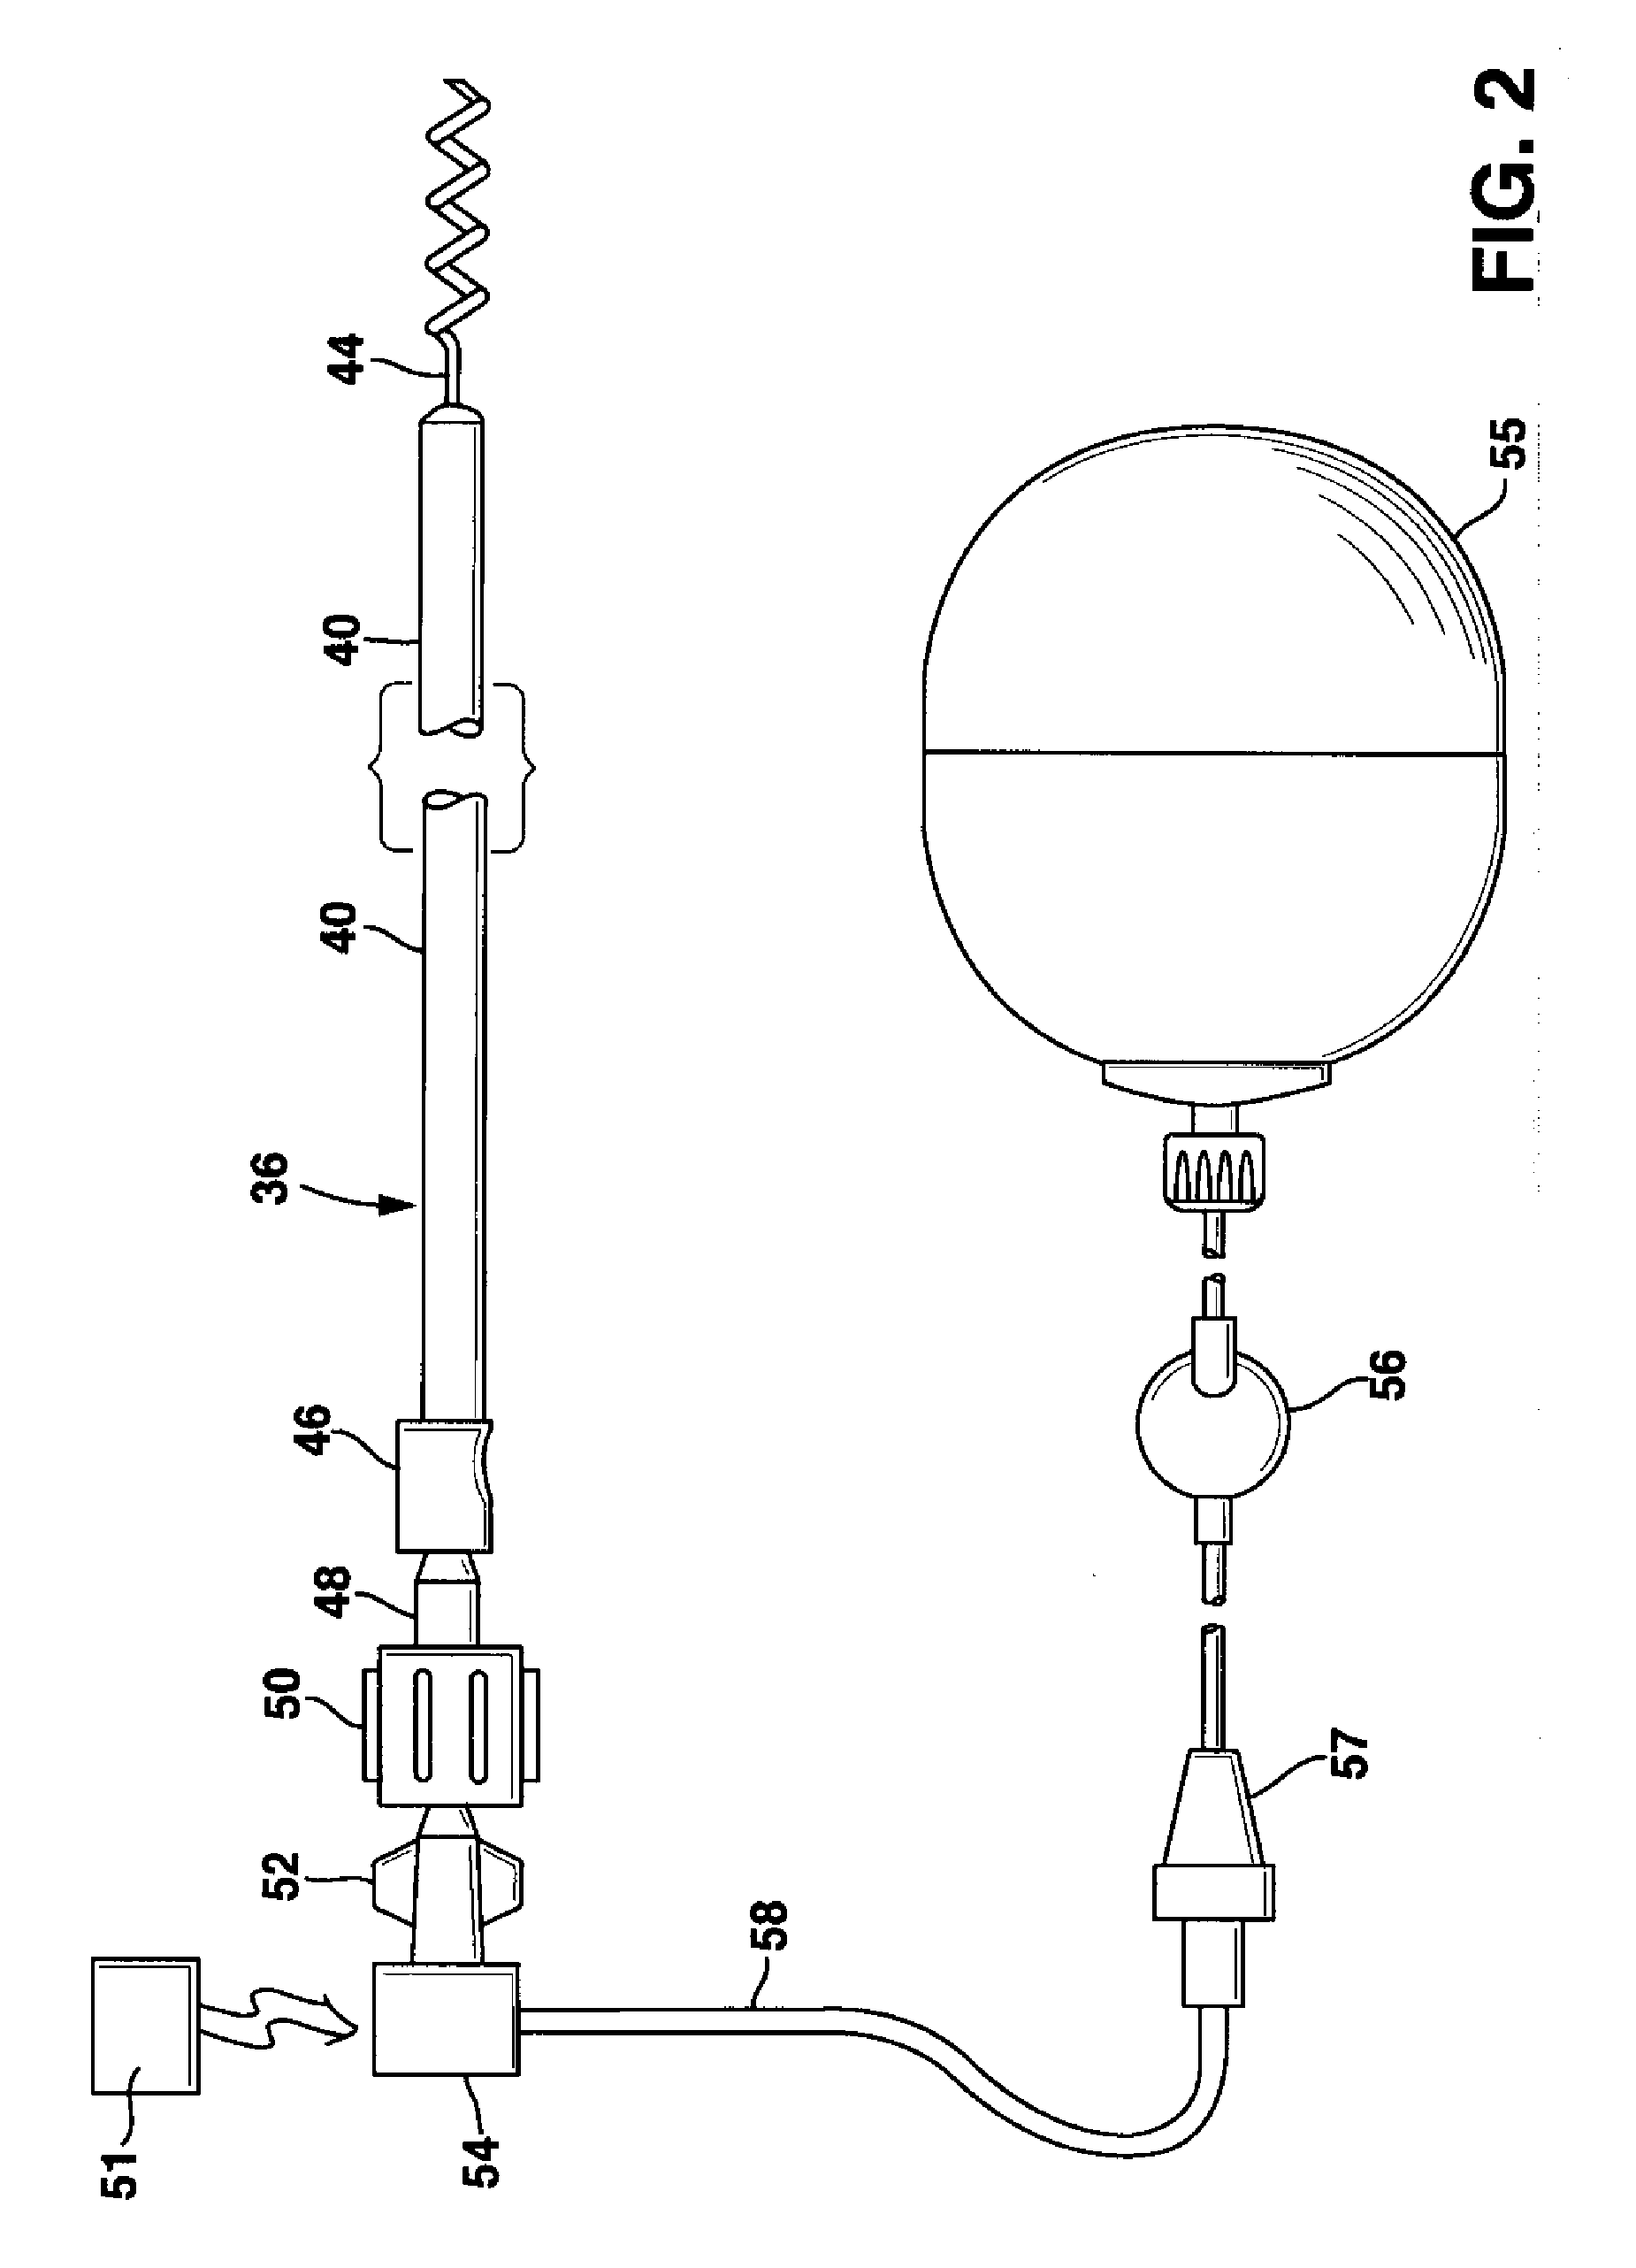 System and Method for Genetically Treating Cardiac Conduction Disturbances